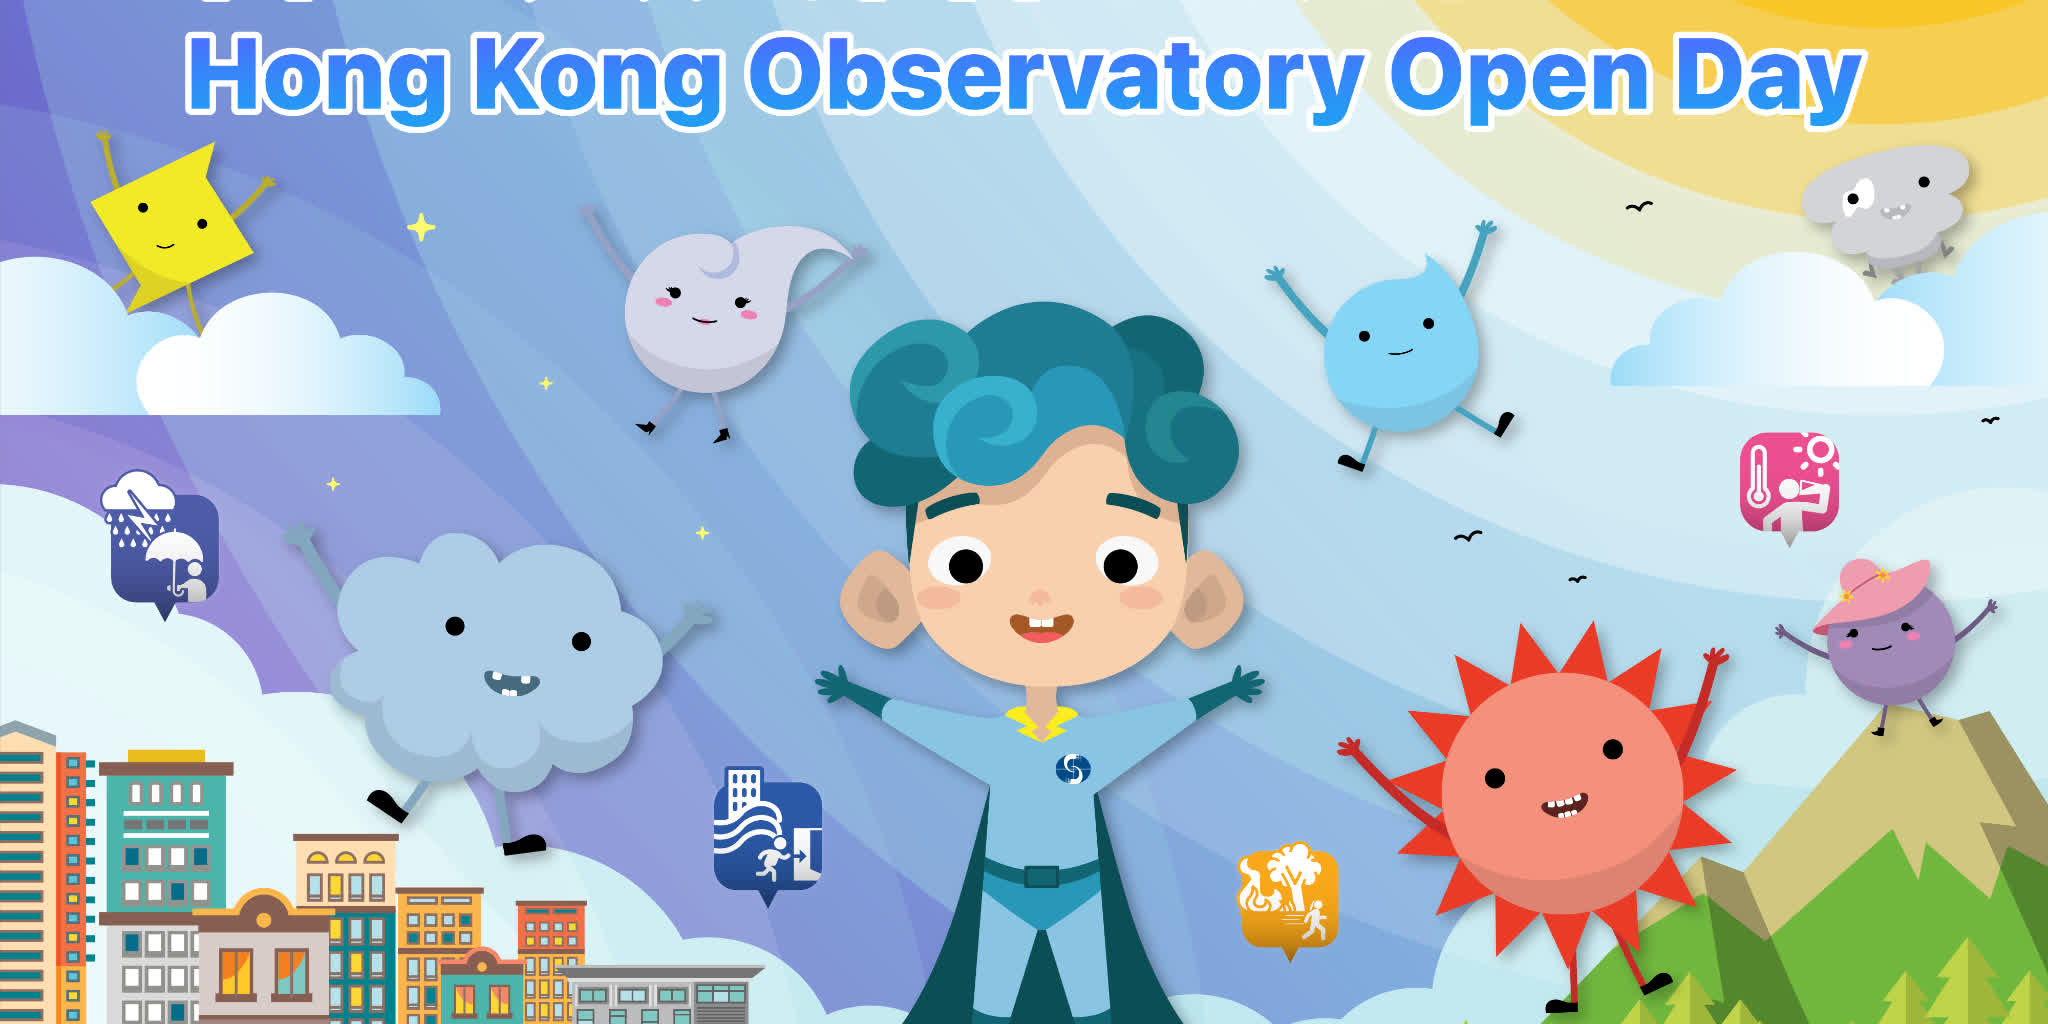 Hong Kong Observatory Open Day 2022 set for Nov 26 and 27